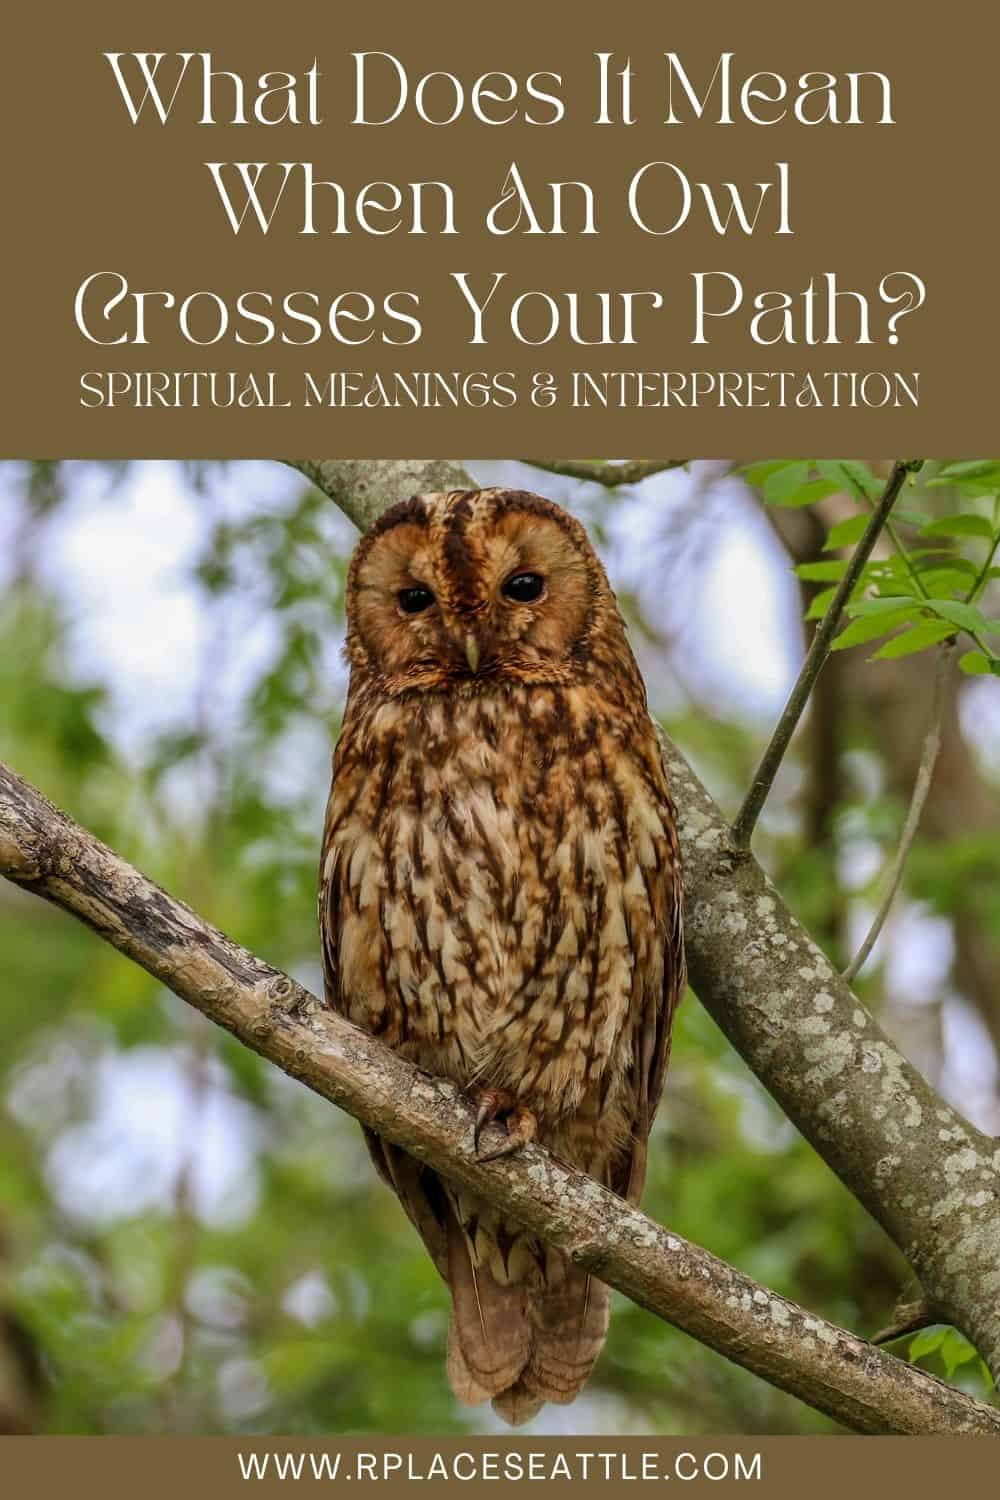 What Does It Mean When An Owl Crosses Your Path (Spiritual Meanings & Interpretation)